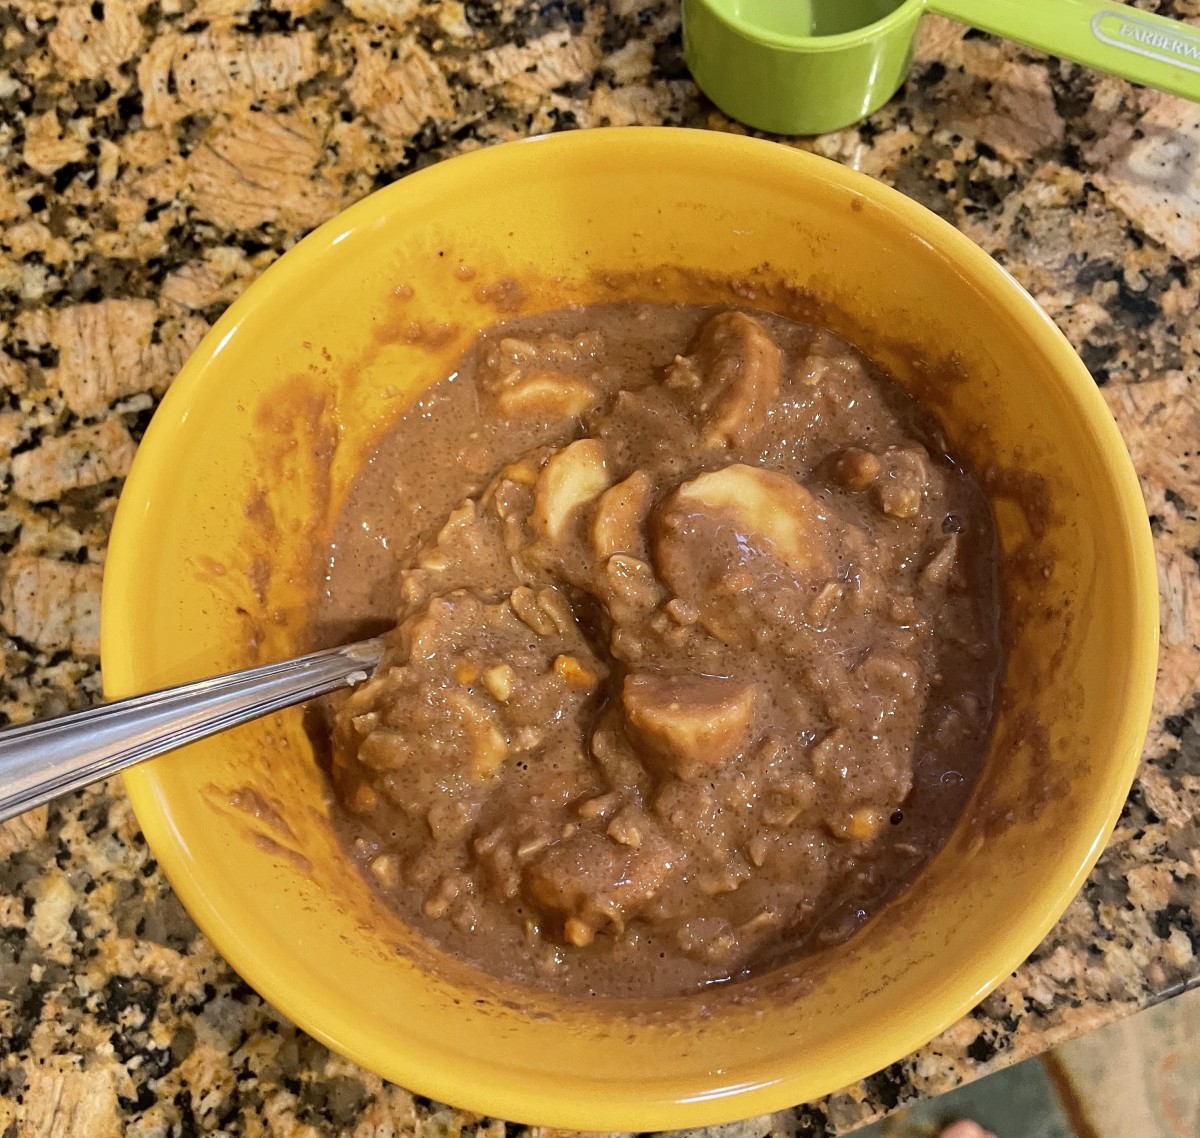 This yummy breakfast combines chocolate, peanut butter, banana, oatmeal, and Malt-O-Meal